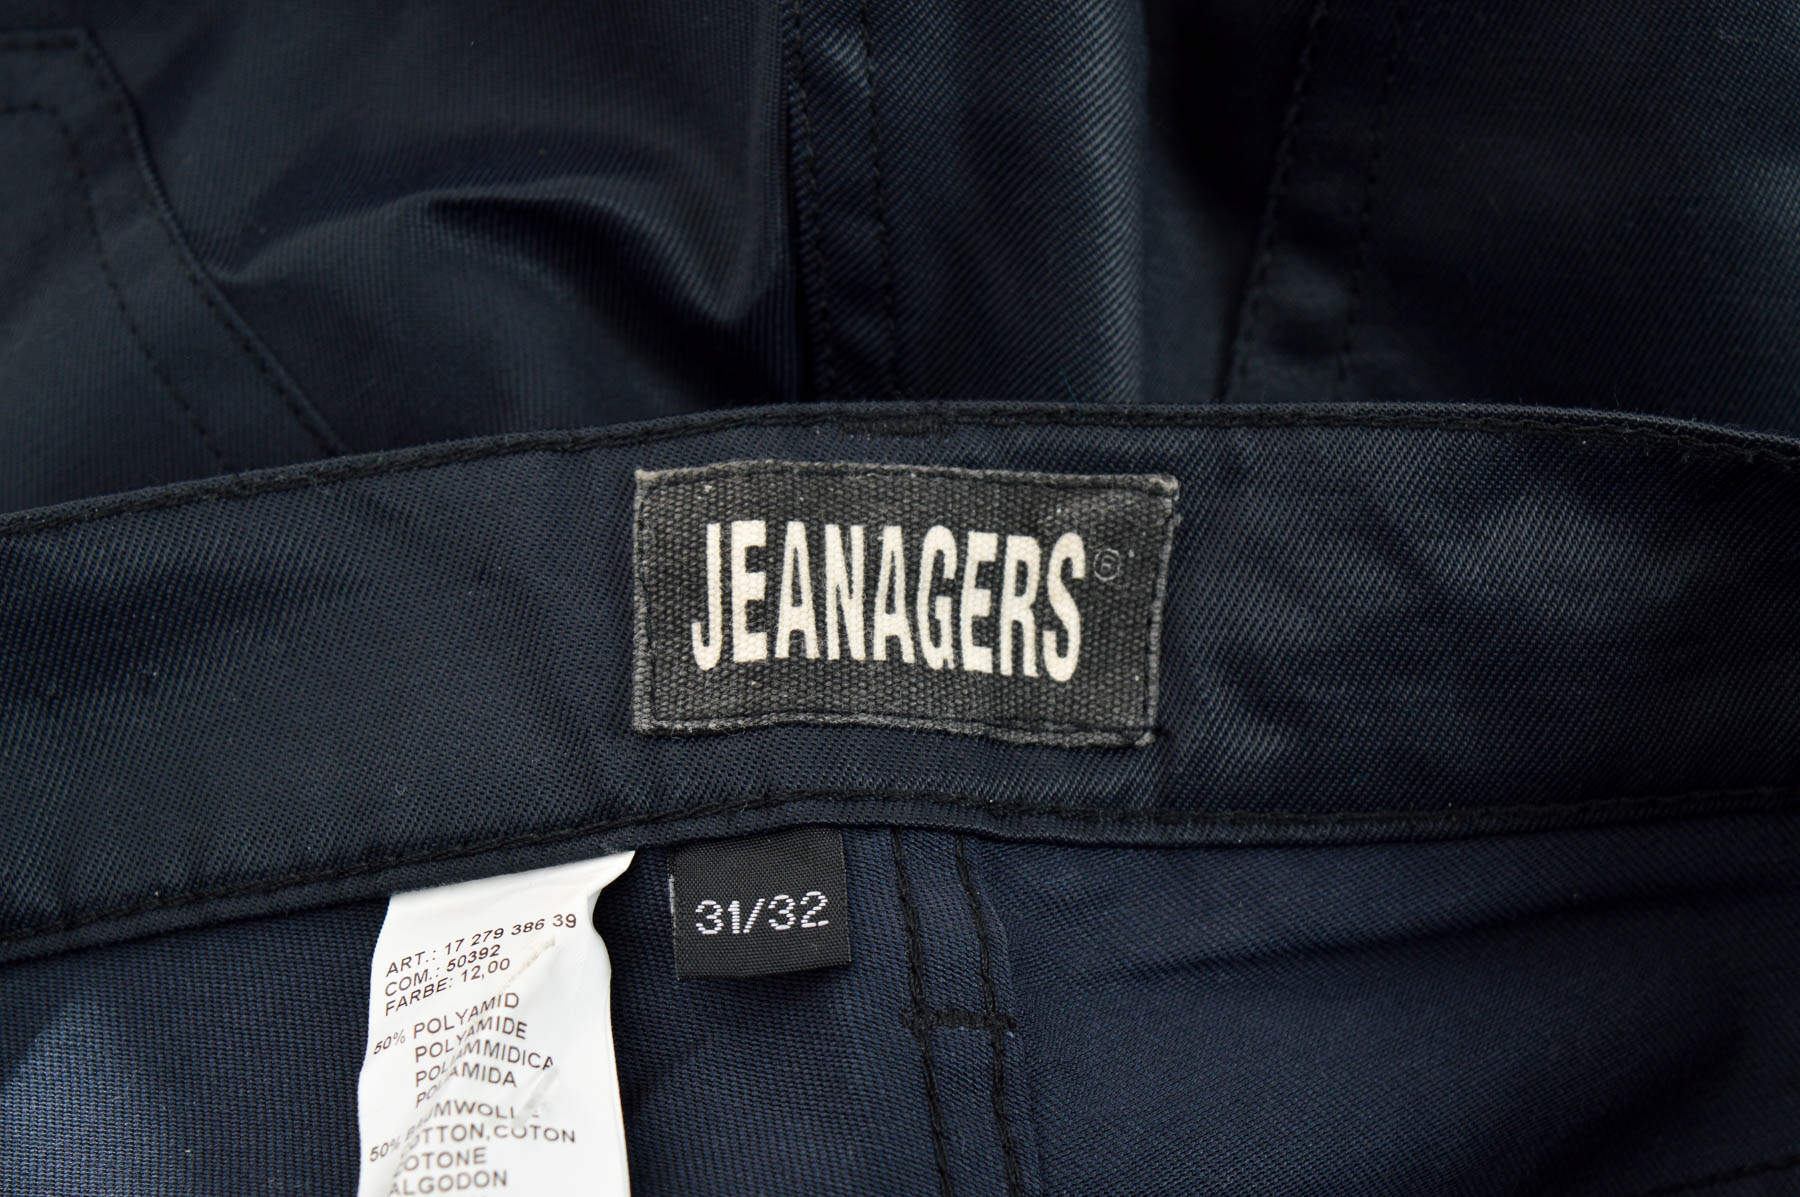 Men's trousers - Jeanagers - 2